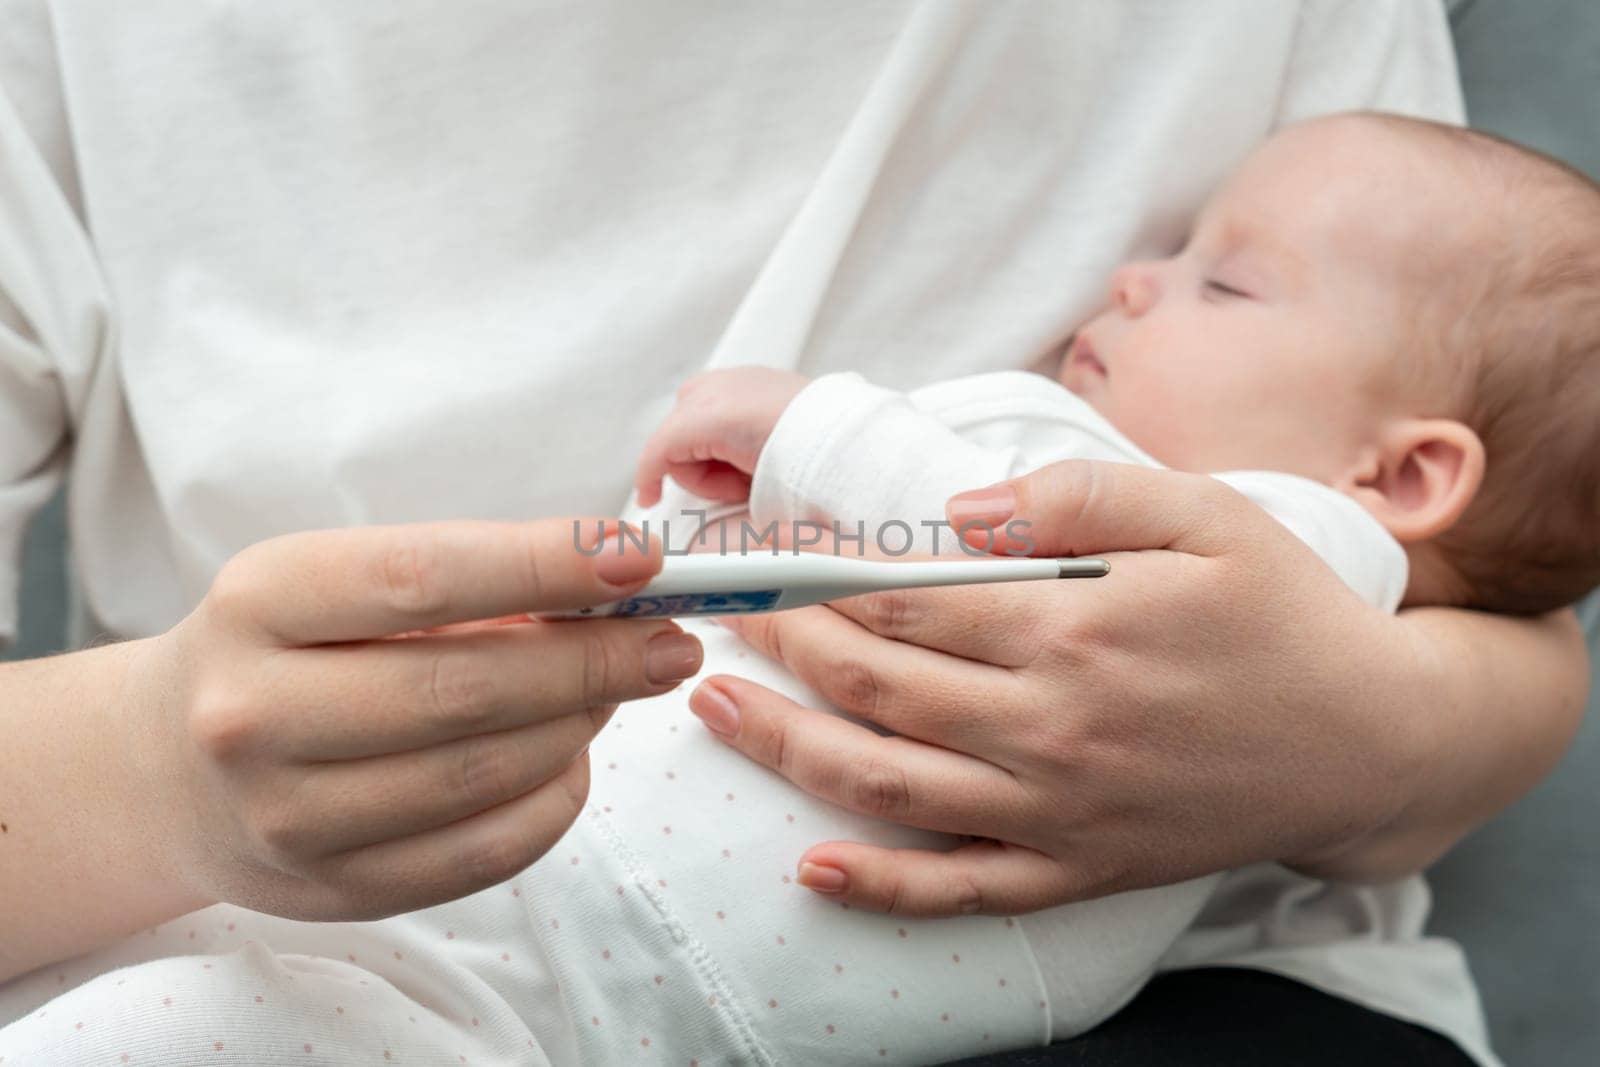 Mother carefully examines thermometer results as she embraces her sick child, ensuring their well